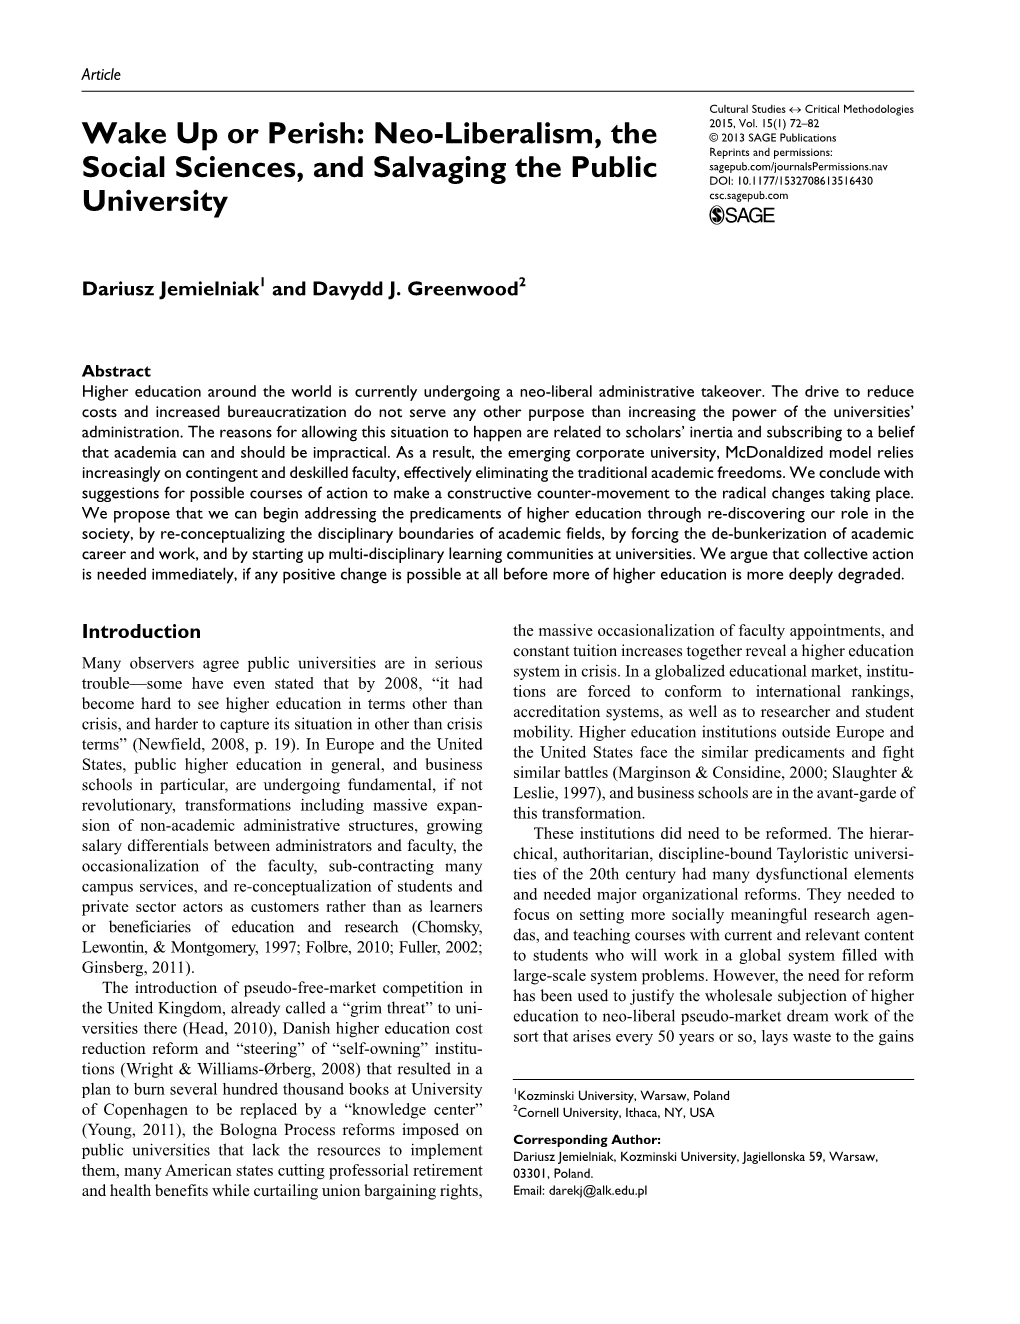 Wake up Or Perish: Neo-Liberalism, the Social Sciences, and Salvaging the Public University